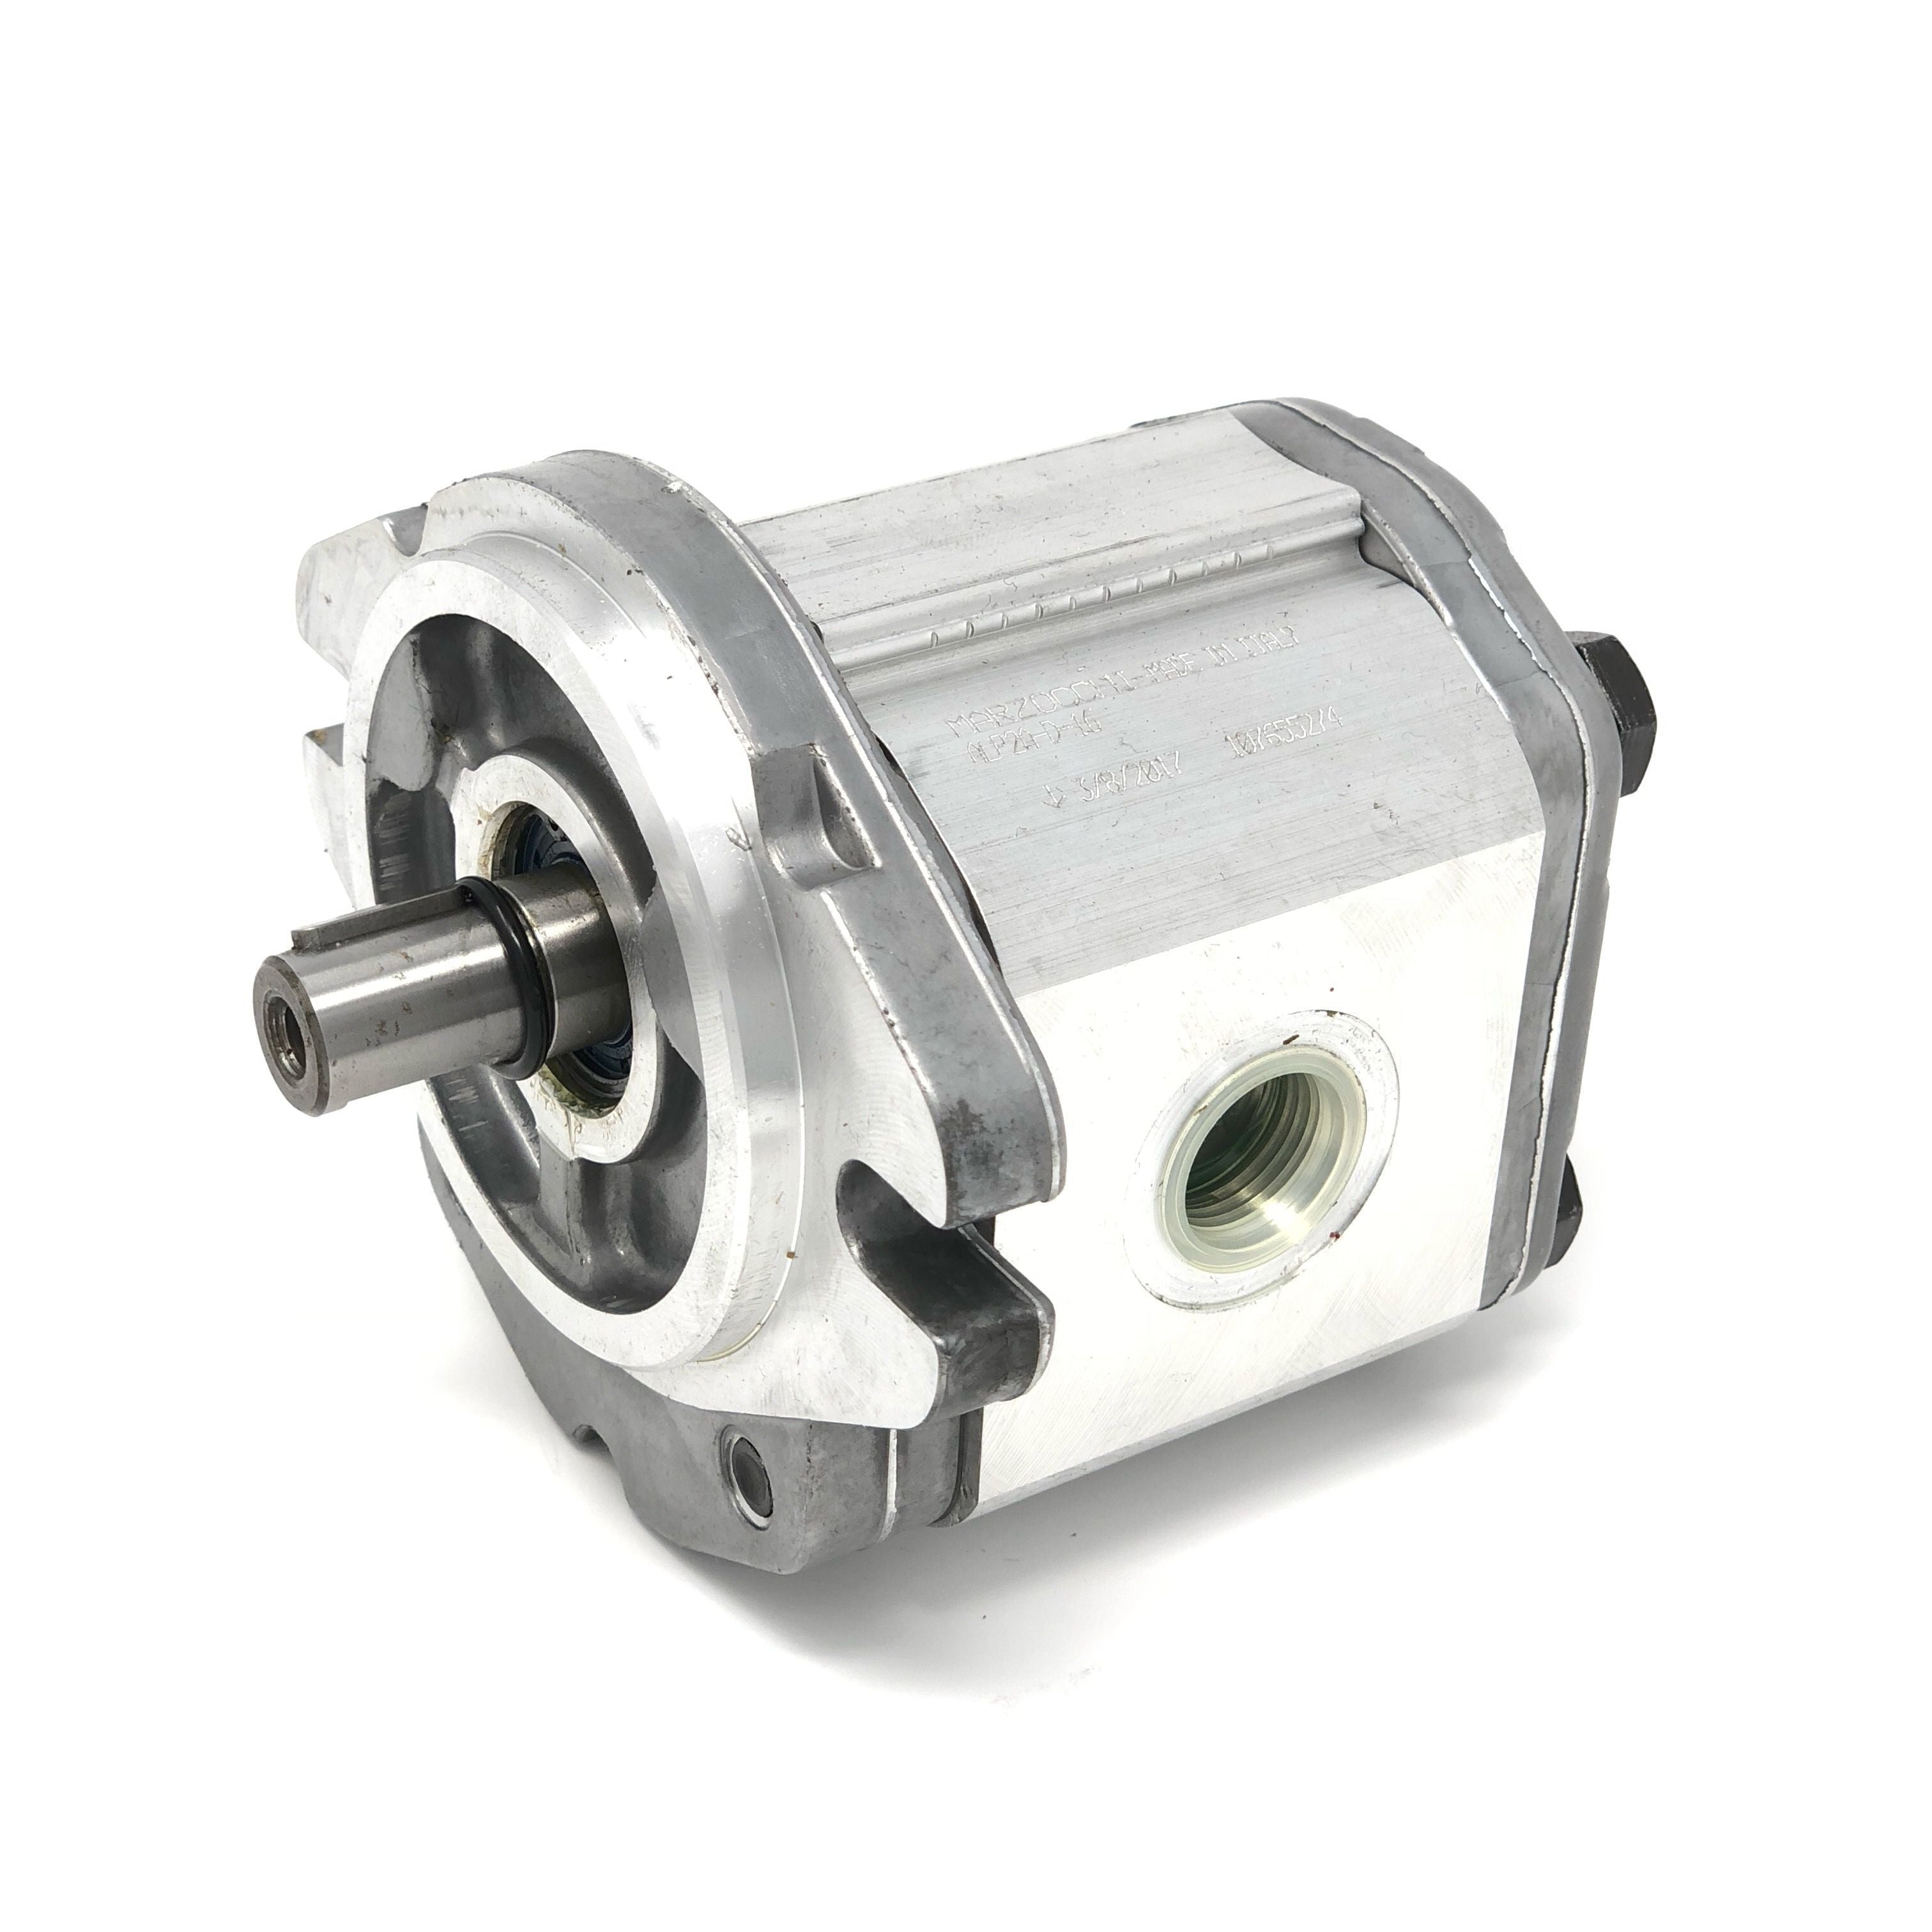 ALP2A-D-22 : Marzocchi Gear Pump, CW, 16cc (0.976in3), 7.61 GPM, 3045psi, 2800 RPM, #12 SAE (3/4") In, #10 SAE (5/8") Out, Keyed Shaft 5/8" Bore x 5/32" Key, SAE A 2-Bolt Mount